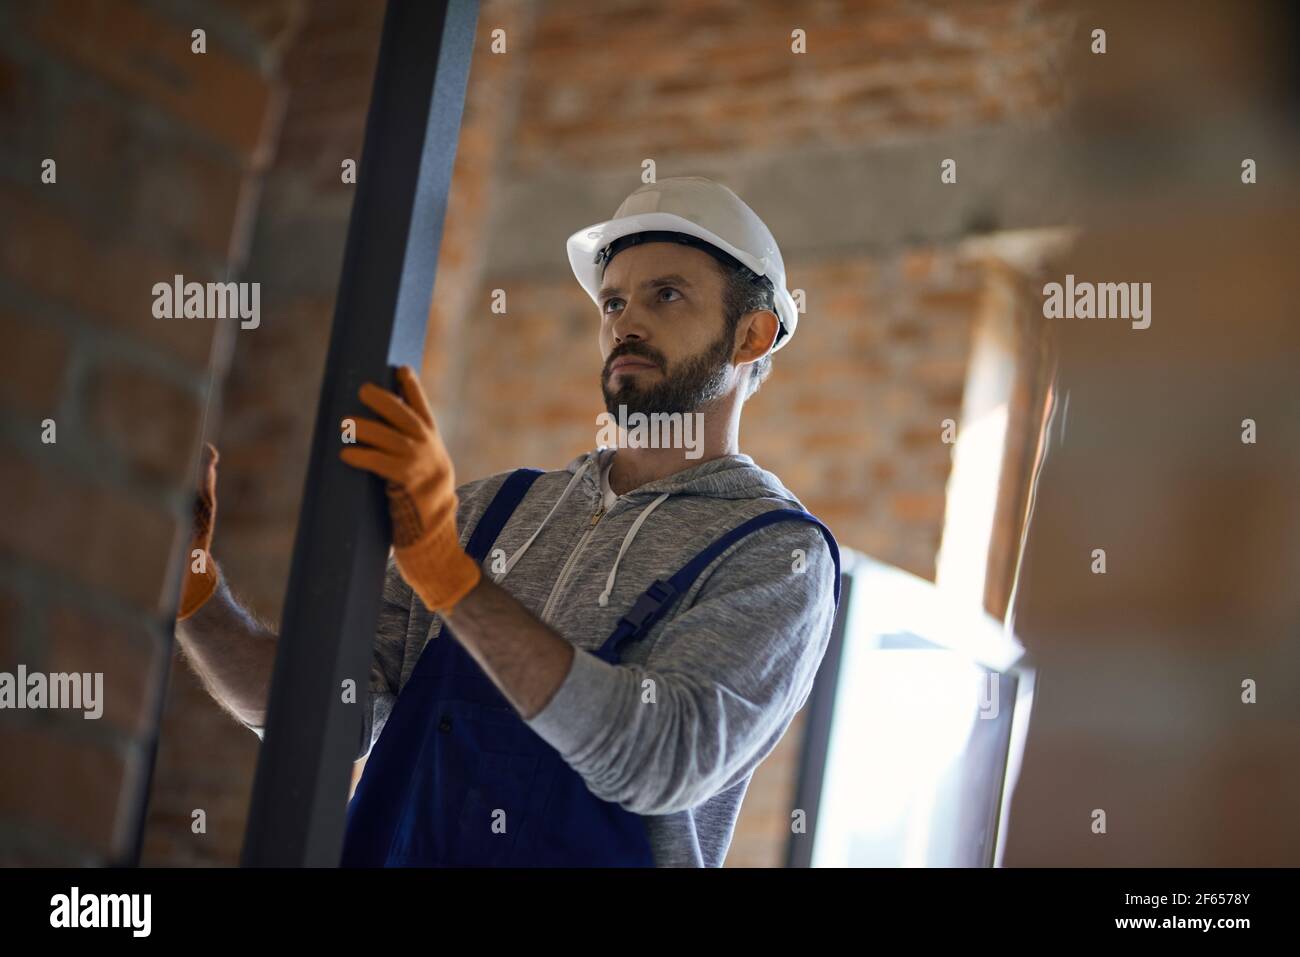 Focused young male builder wearing hard hat holding metal stud for drywall while working at construction site Stock Photo